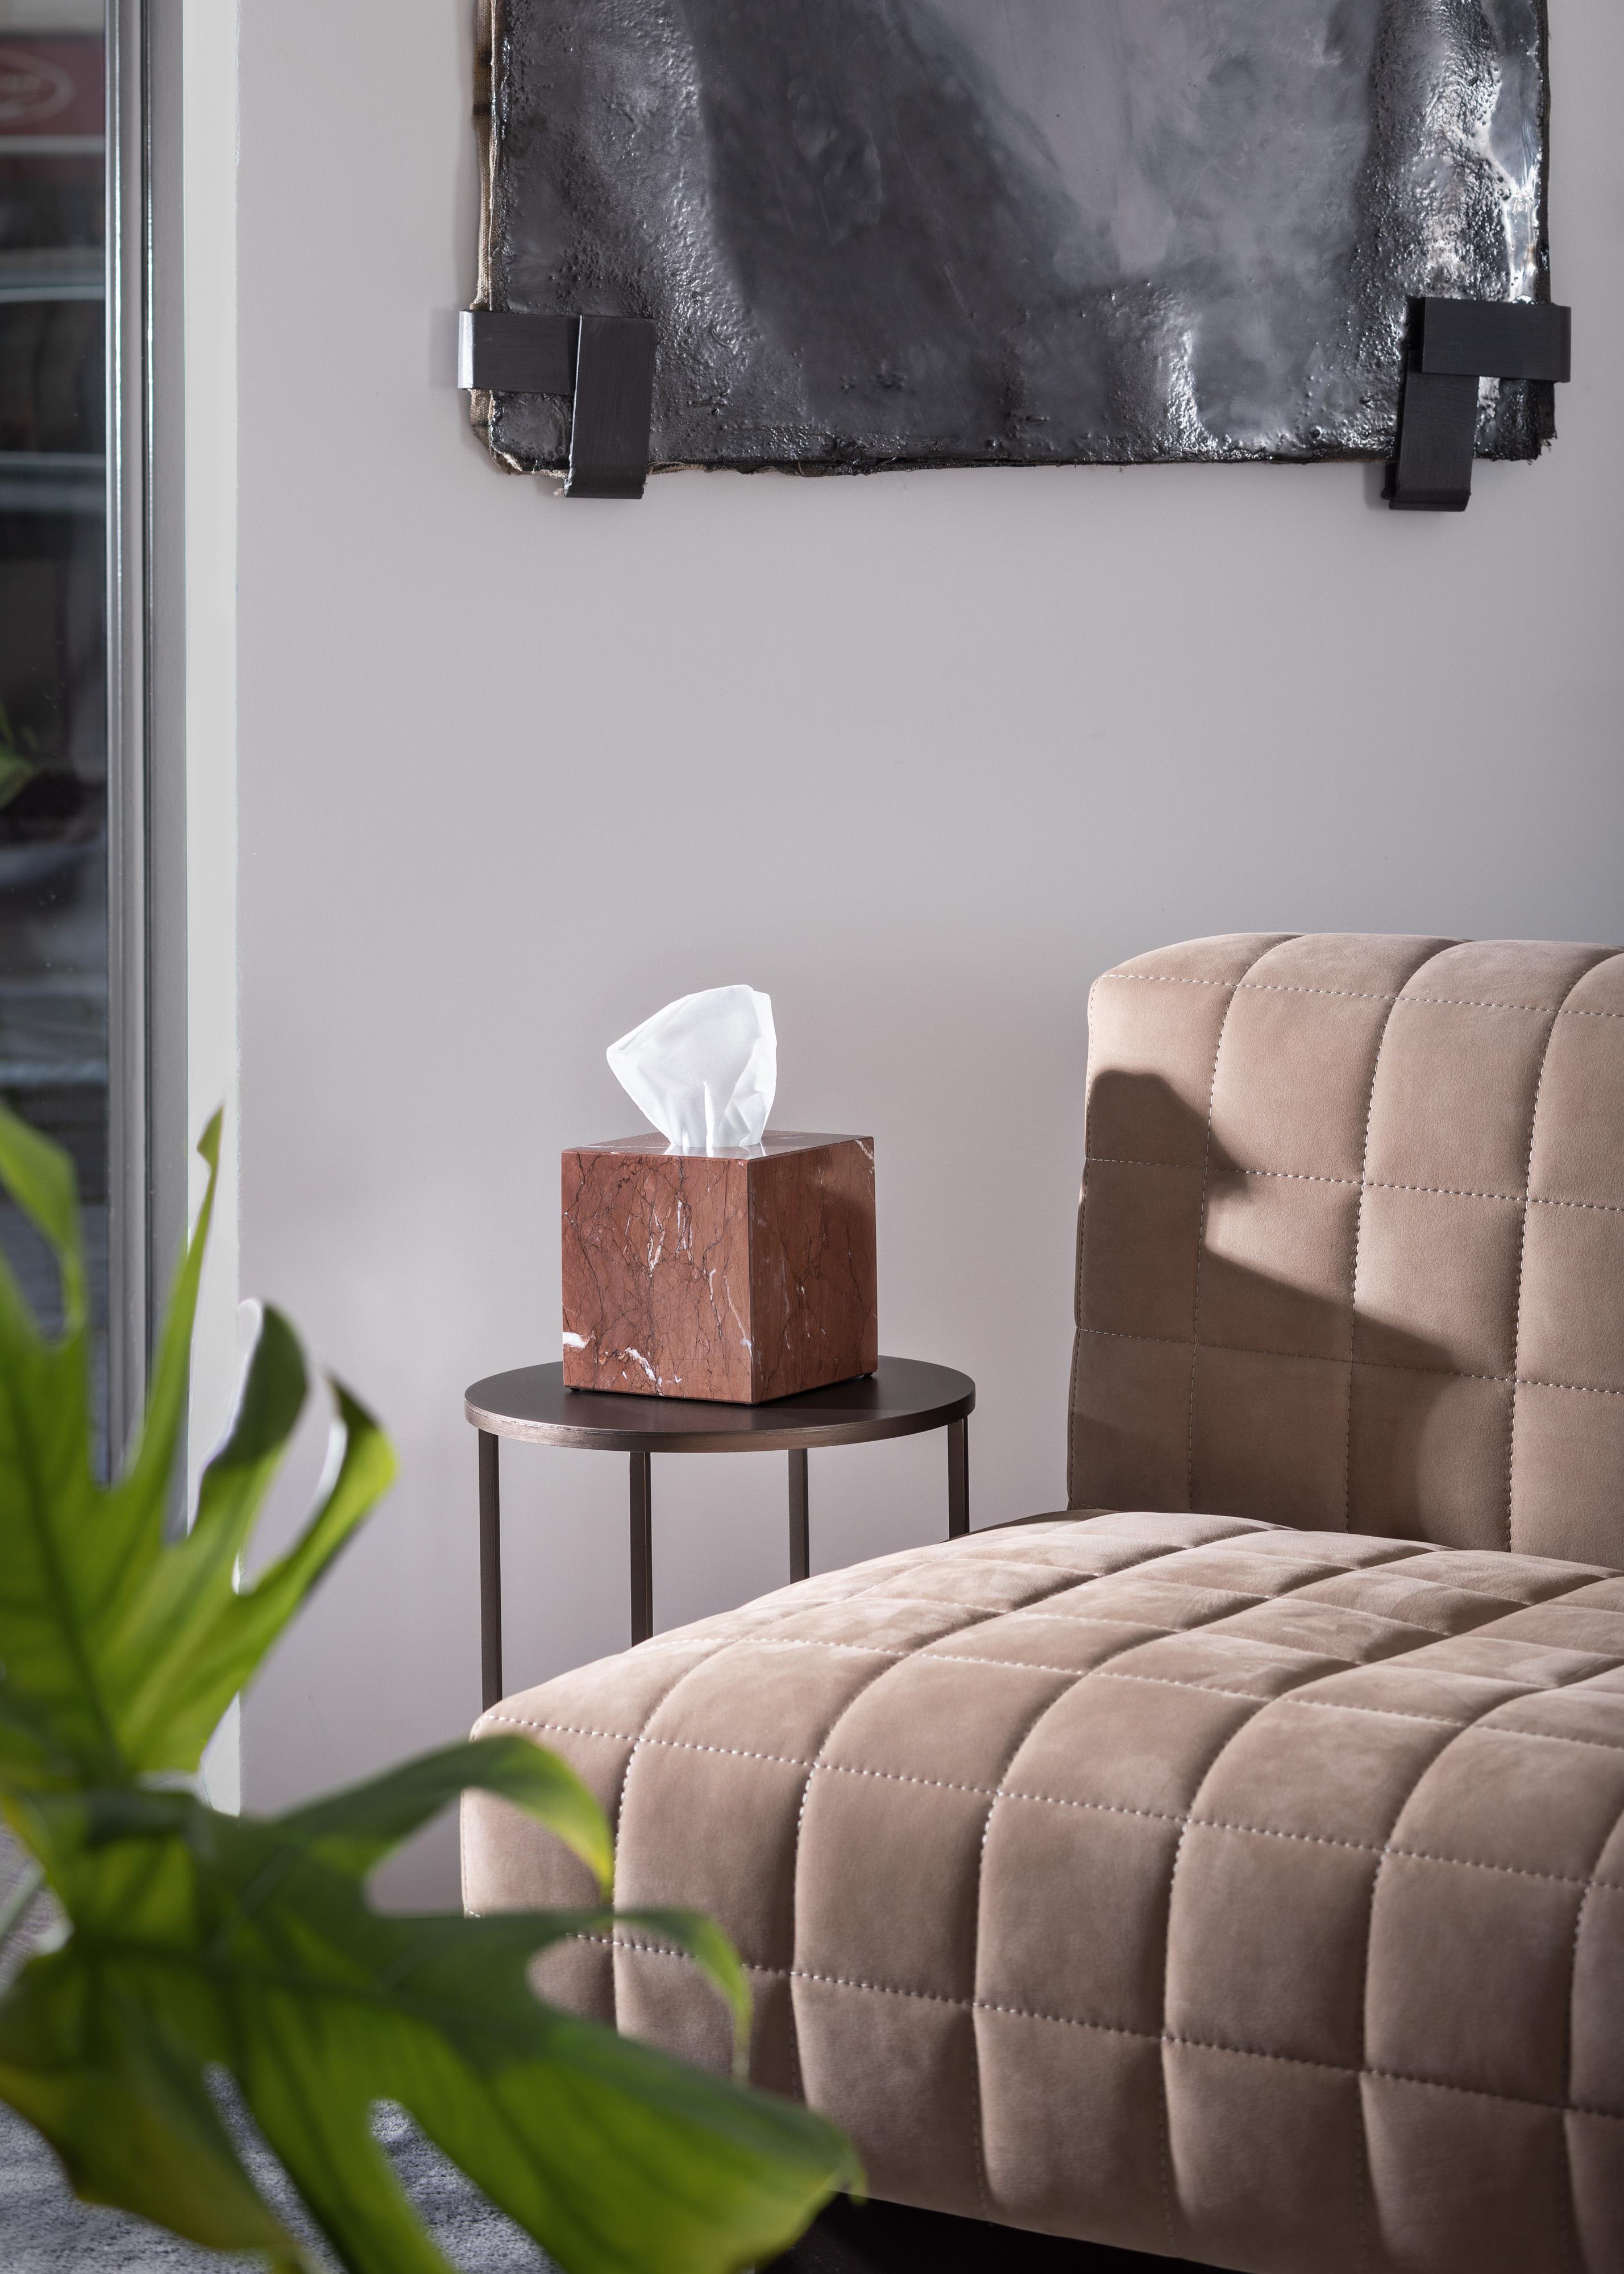 Crafted entirely by hand, this marble tissue box cover is a fusion of form and function, seamlessly blending into any space while adding sophistication and elegance. Clean, minimalist lines highlight the natural veining of the marble, making each